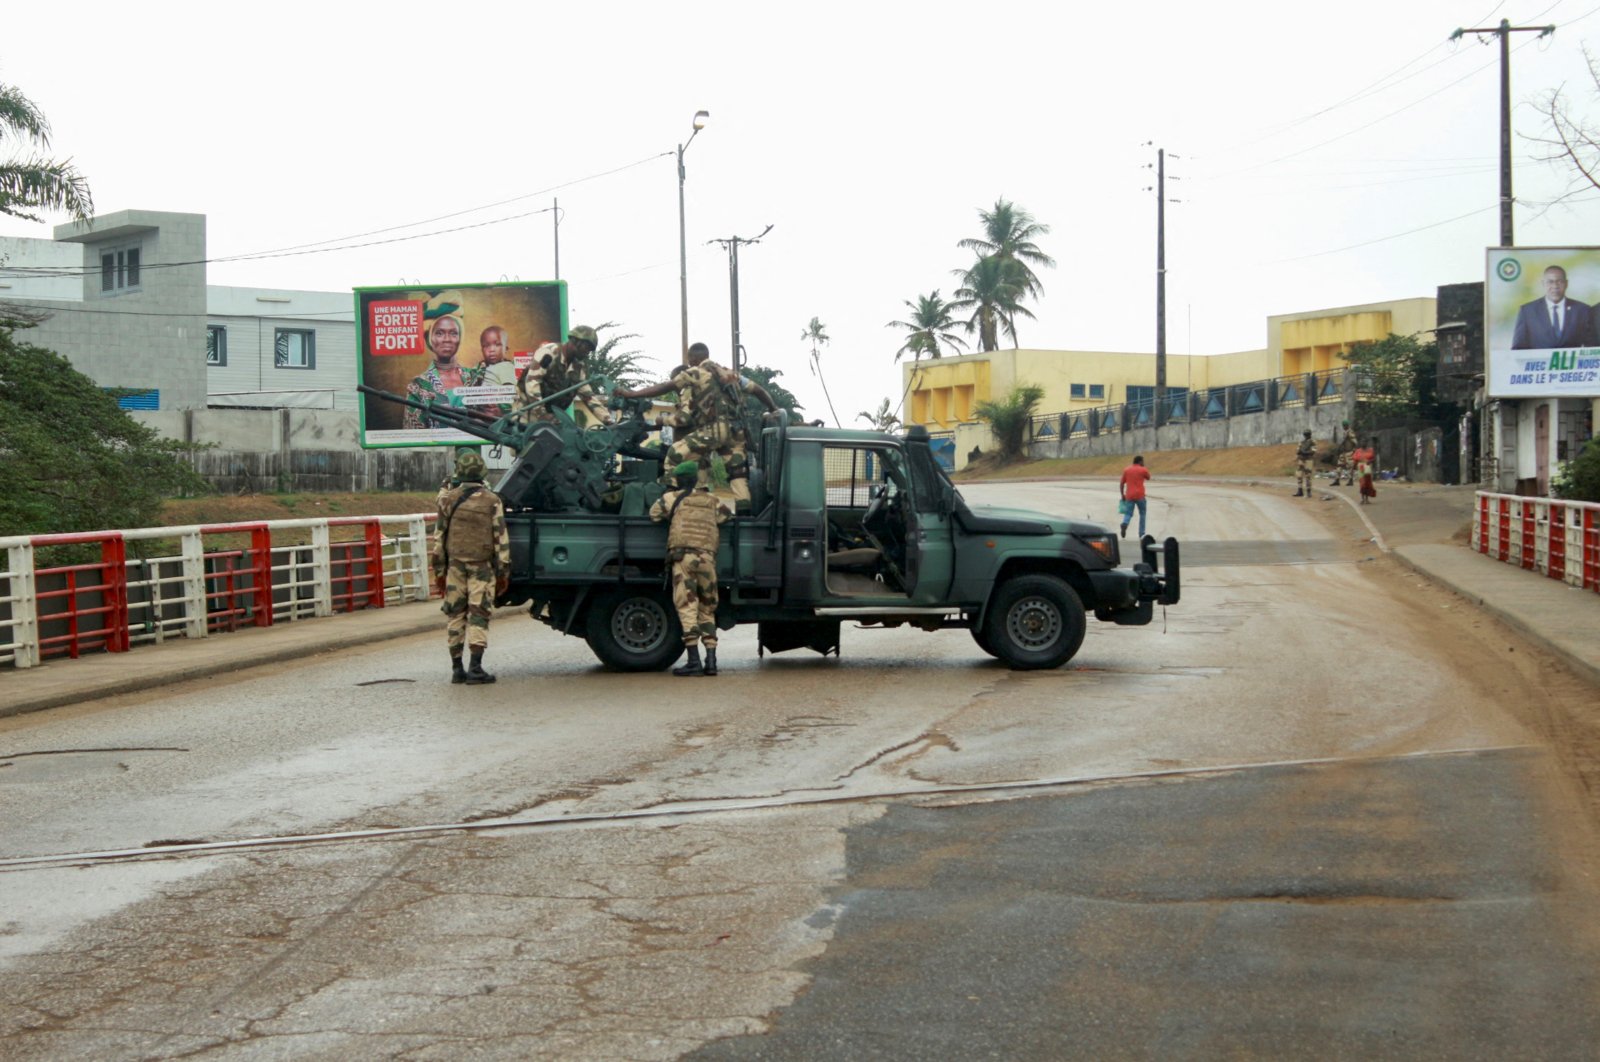 Soldiers of the Republican Guard stand on their armed pick-up in a street in Libreville, Gabon, Aug. 30, 2023. (Reuters Photo)